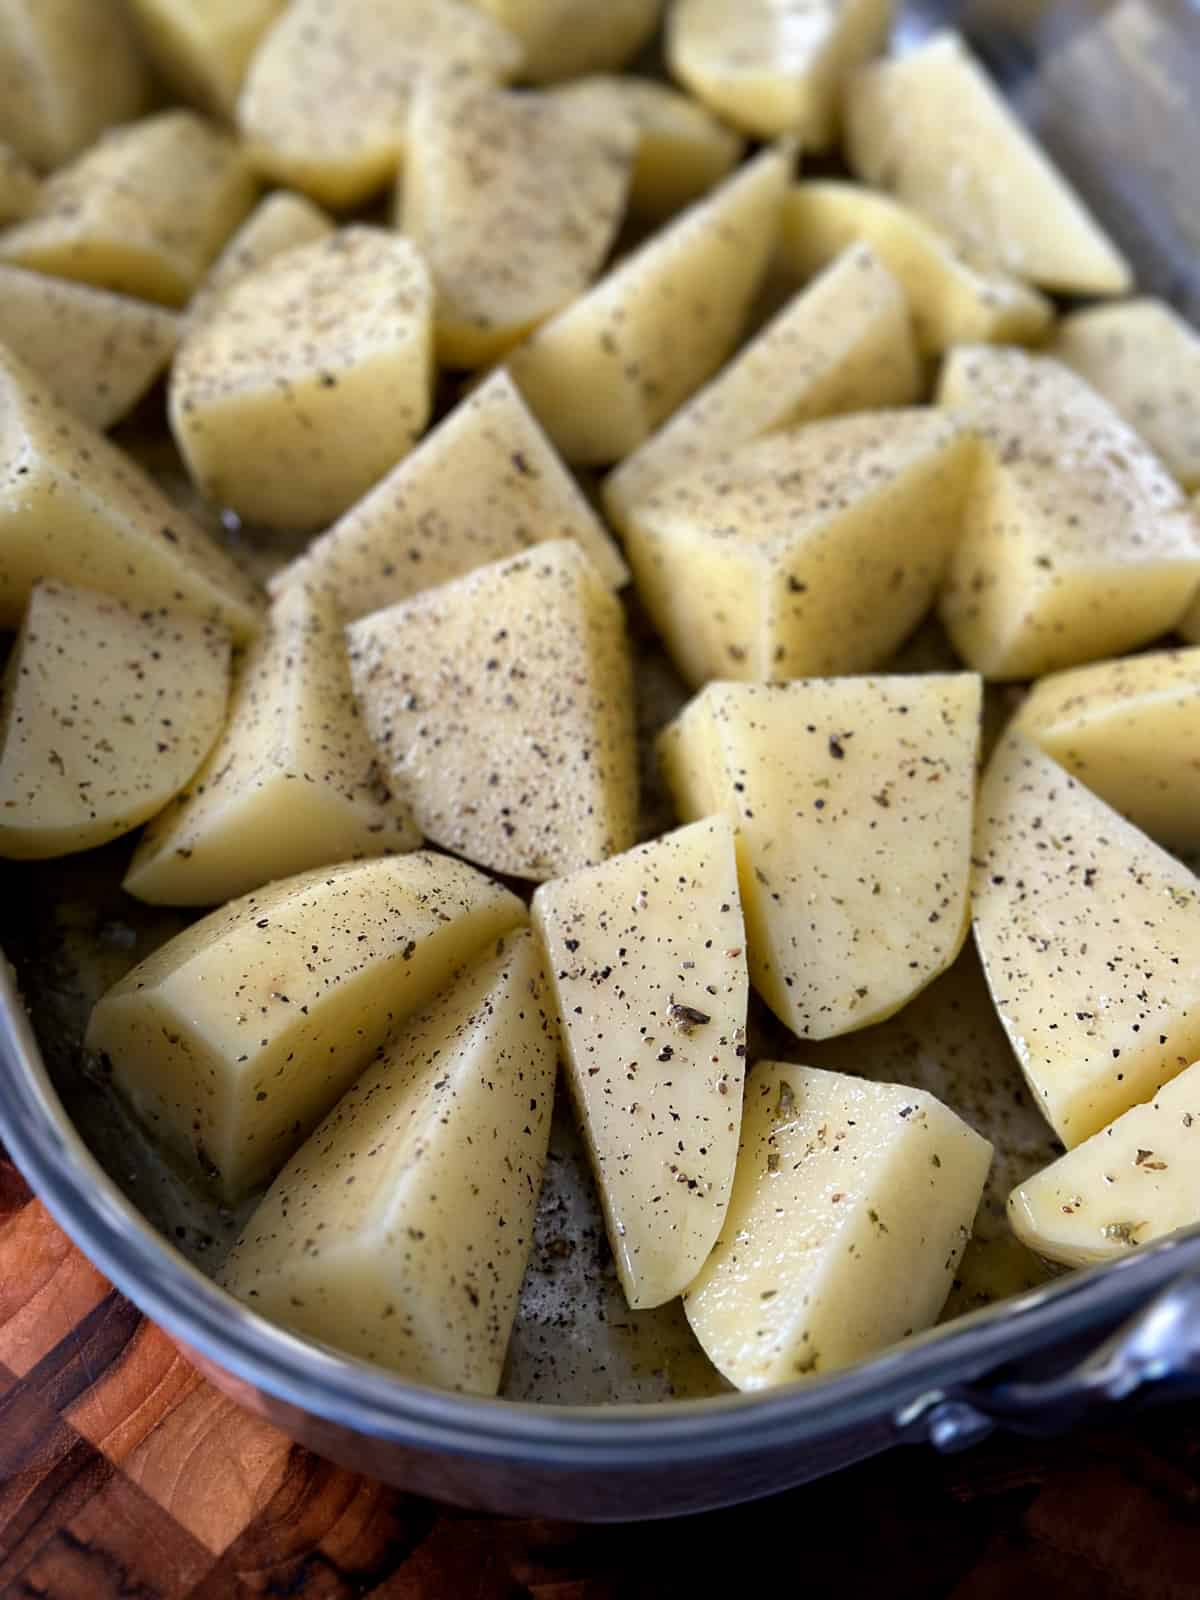 A baking pan with potatoes seasoned with oregano, salt and pepper on a cutting board.